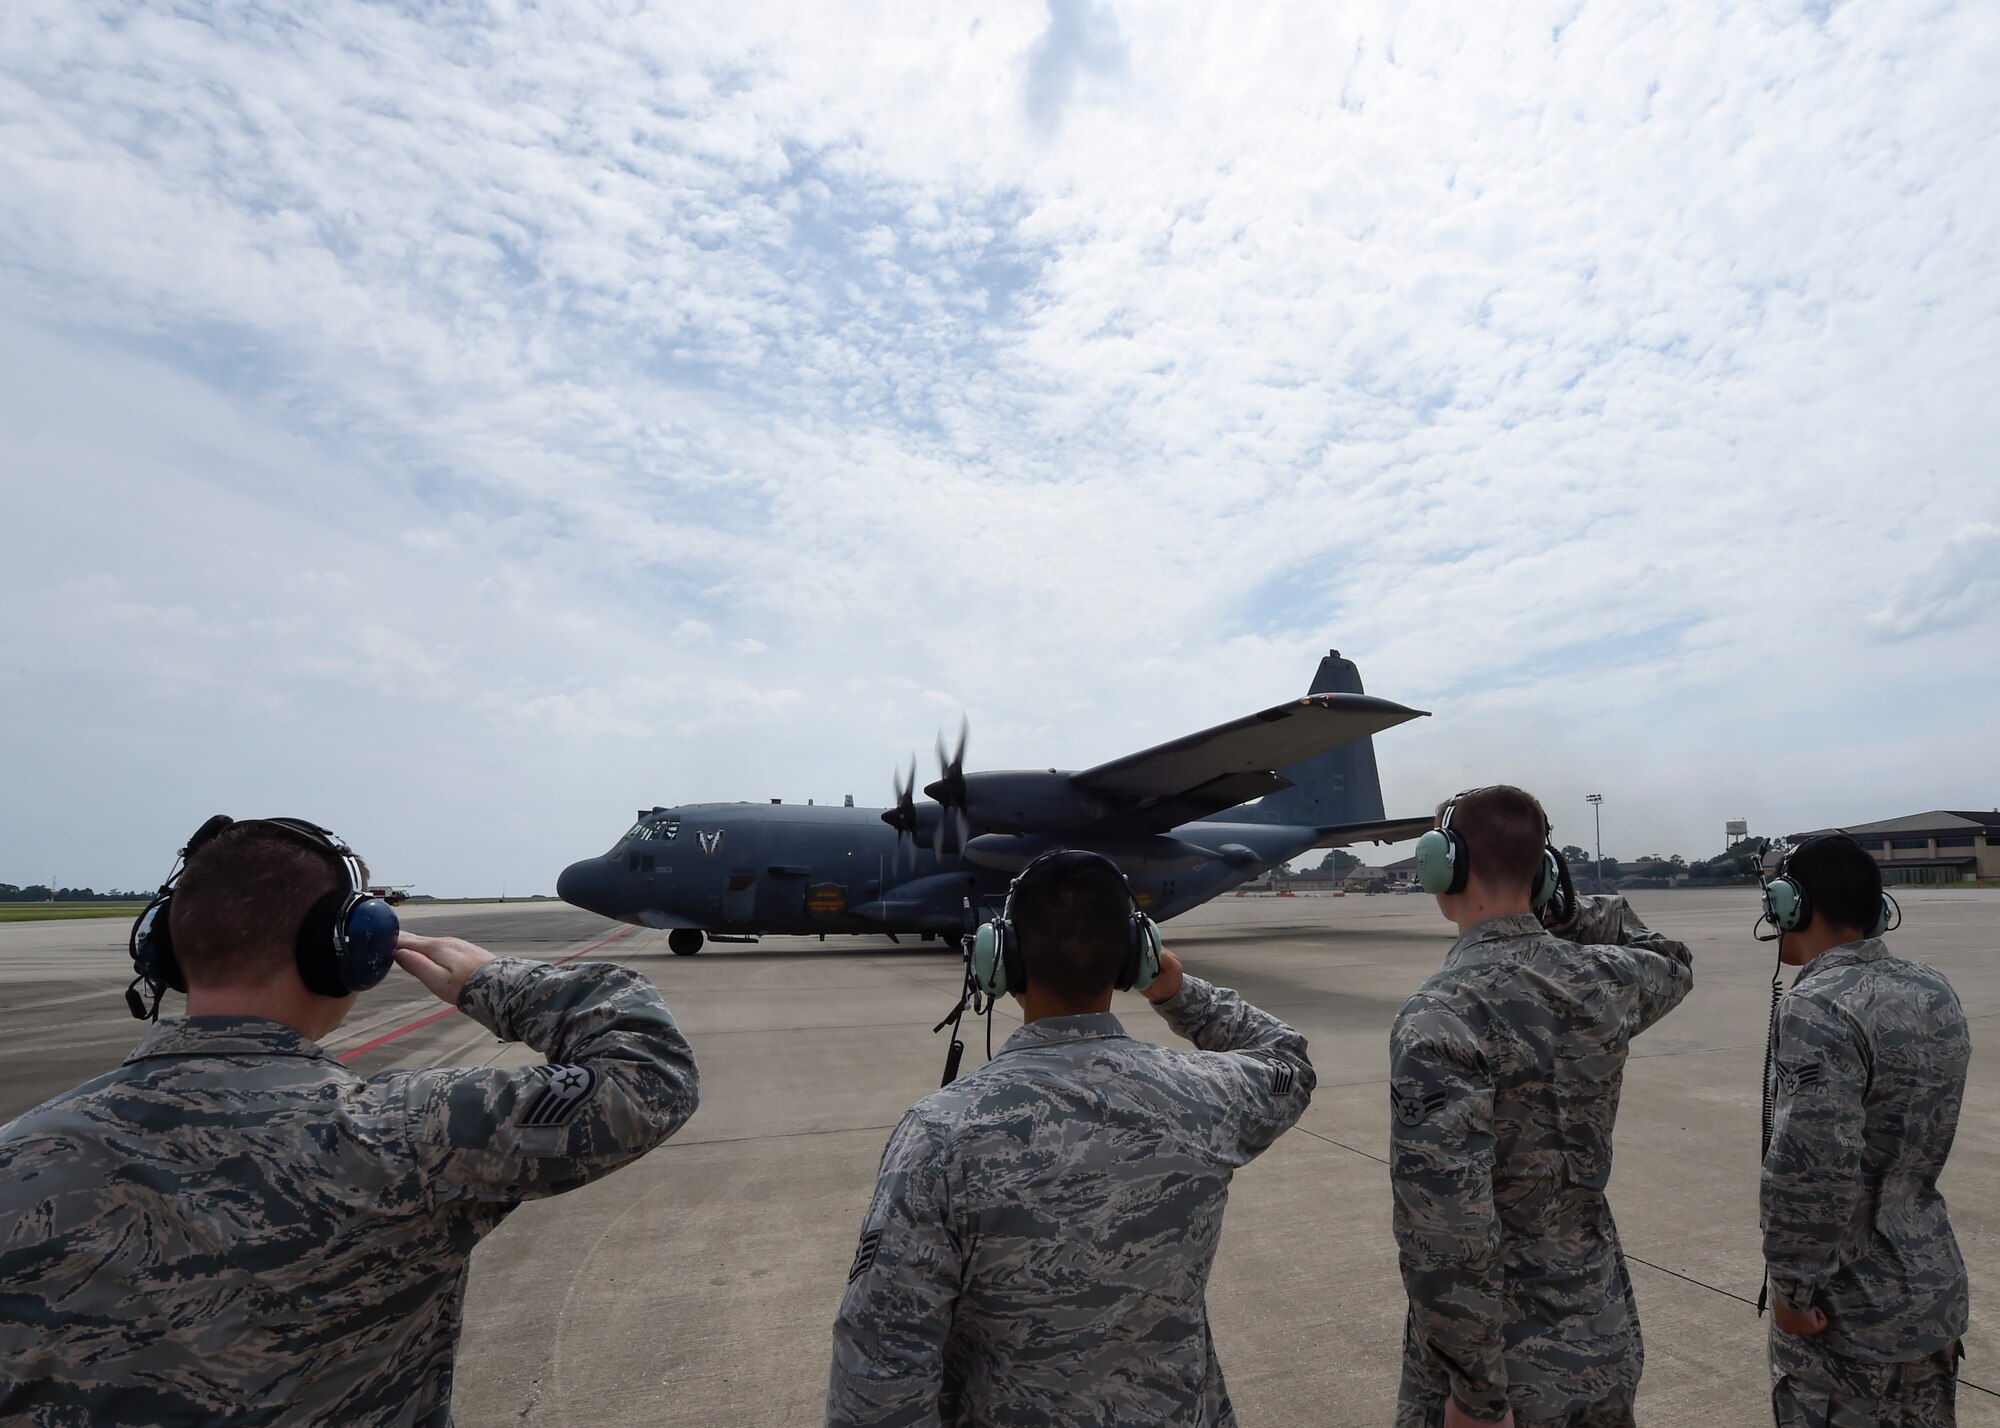 Airmen with the 1st Special Operations Aircraft Maintenance Squadron render a final salute to an AC-130U Spooky before its retirement flight at Hurlburt Field, Fla., Sept. 21, 2015. Tail number 0163, “Bad Omen,” was retired Sept. 21, 2015, after more than 20 years of service. “Bad Omen” last deployed to Bagram Airfield, Afghanistan in December 2013 where it accumulated approximately 600 combat hours and flew more than 100 sorties. (U.S. Air Force photo by Airman Kai White)